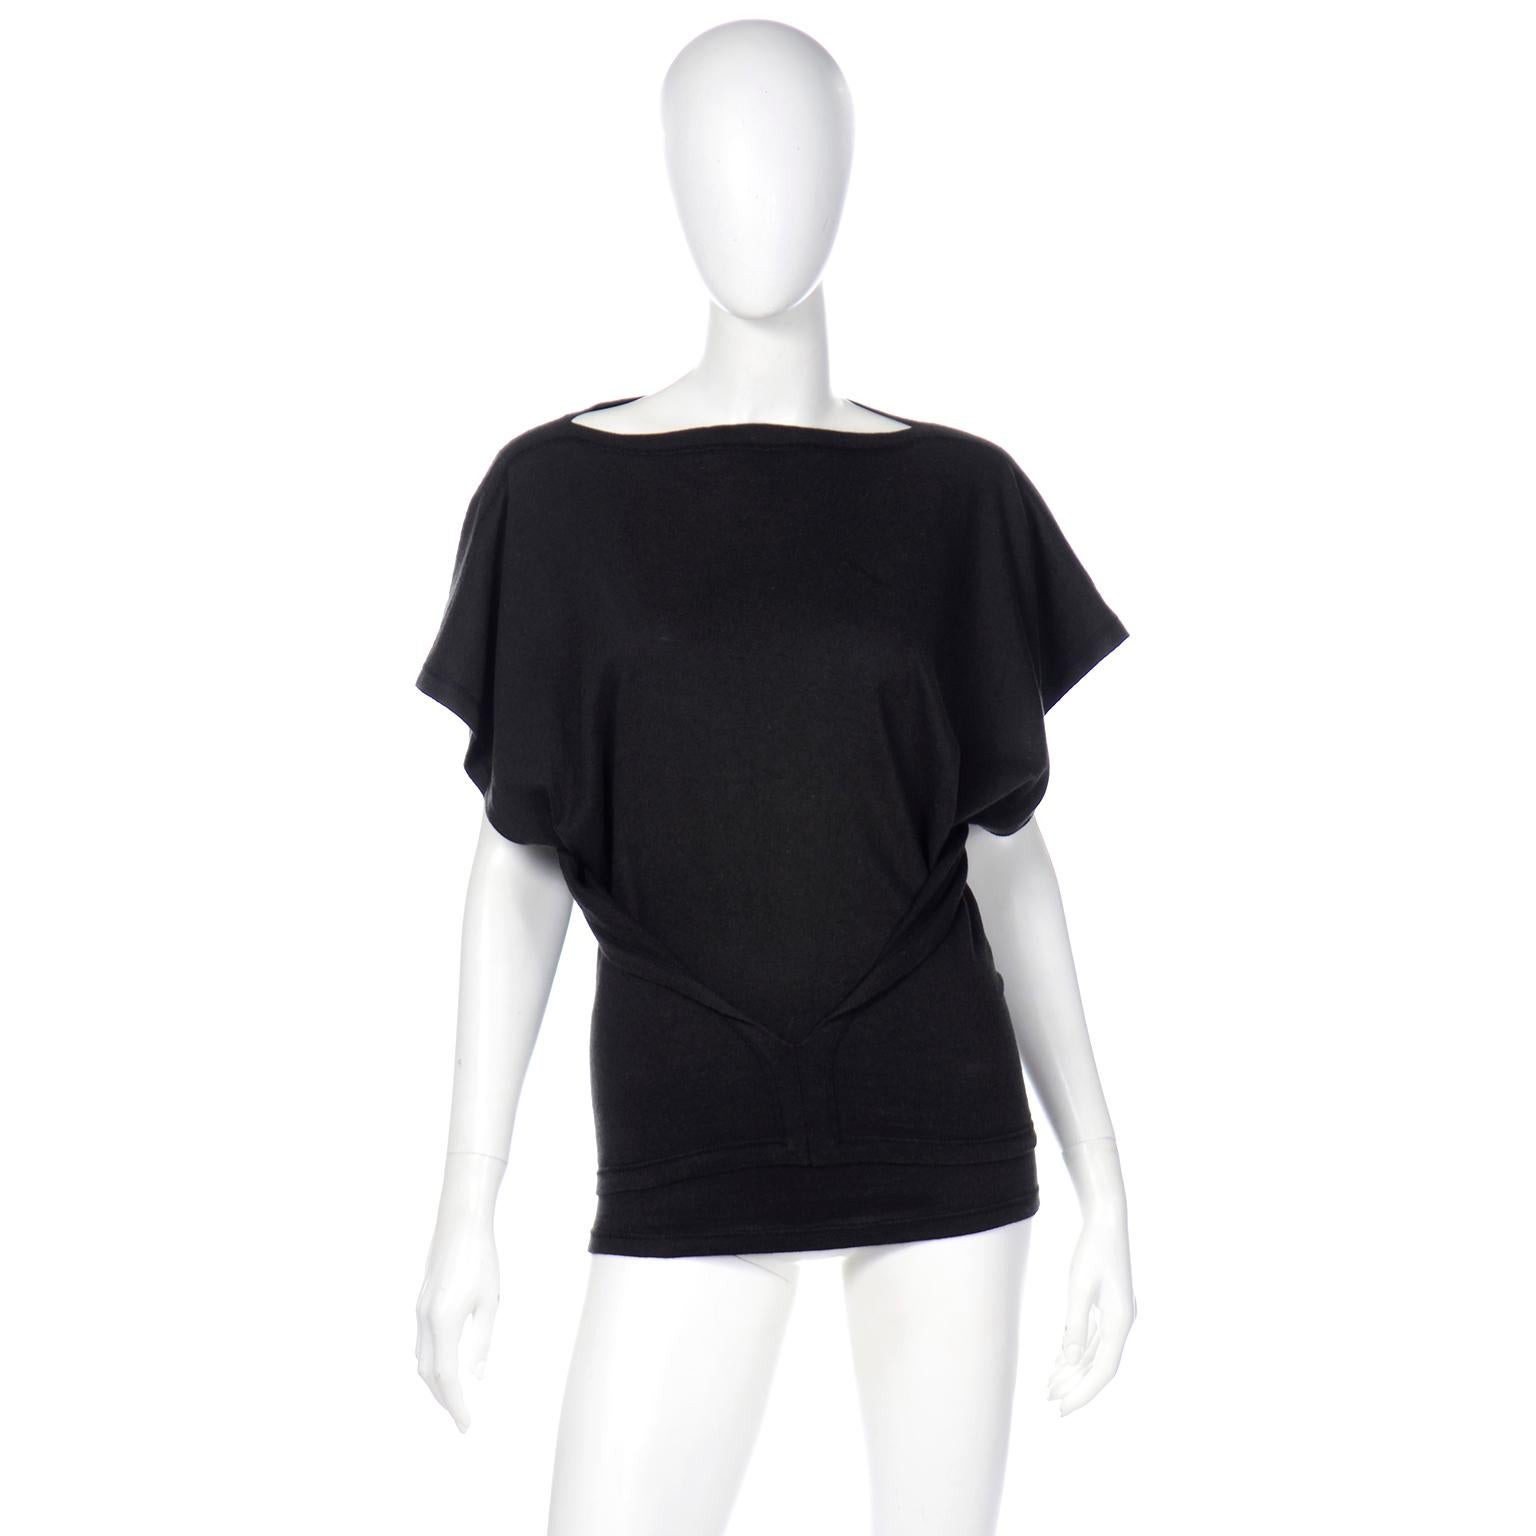 This is a very unique Issey Miyake vintage top in a washed black cotton with the Plantation label. This great top has bat wings with short square cut sleeves that drape really well when worn. There are cutouts on the sides and two closed panels